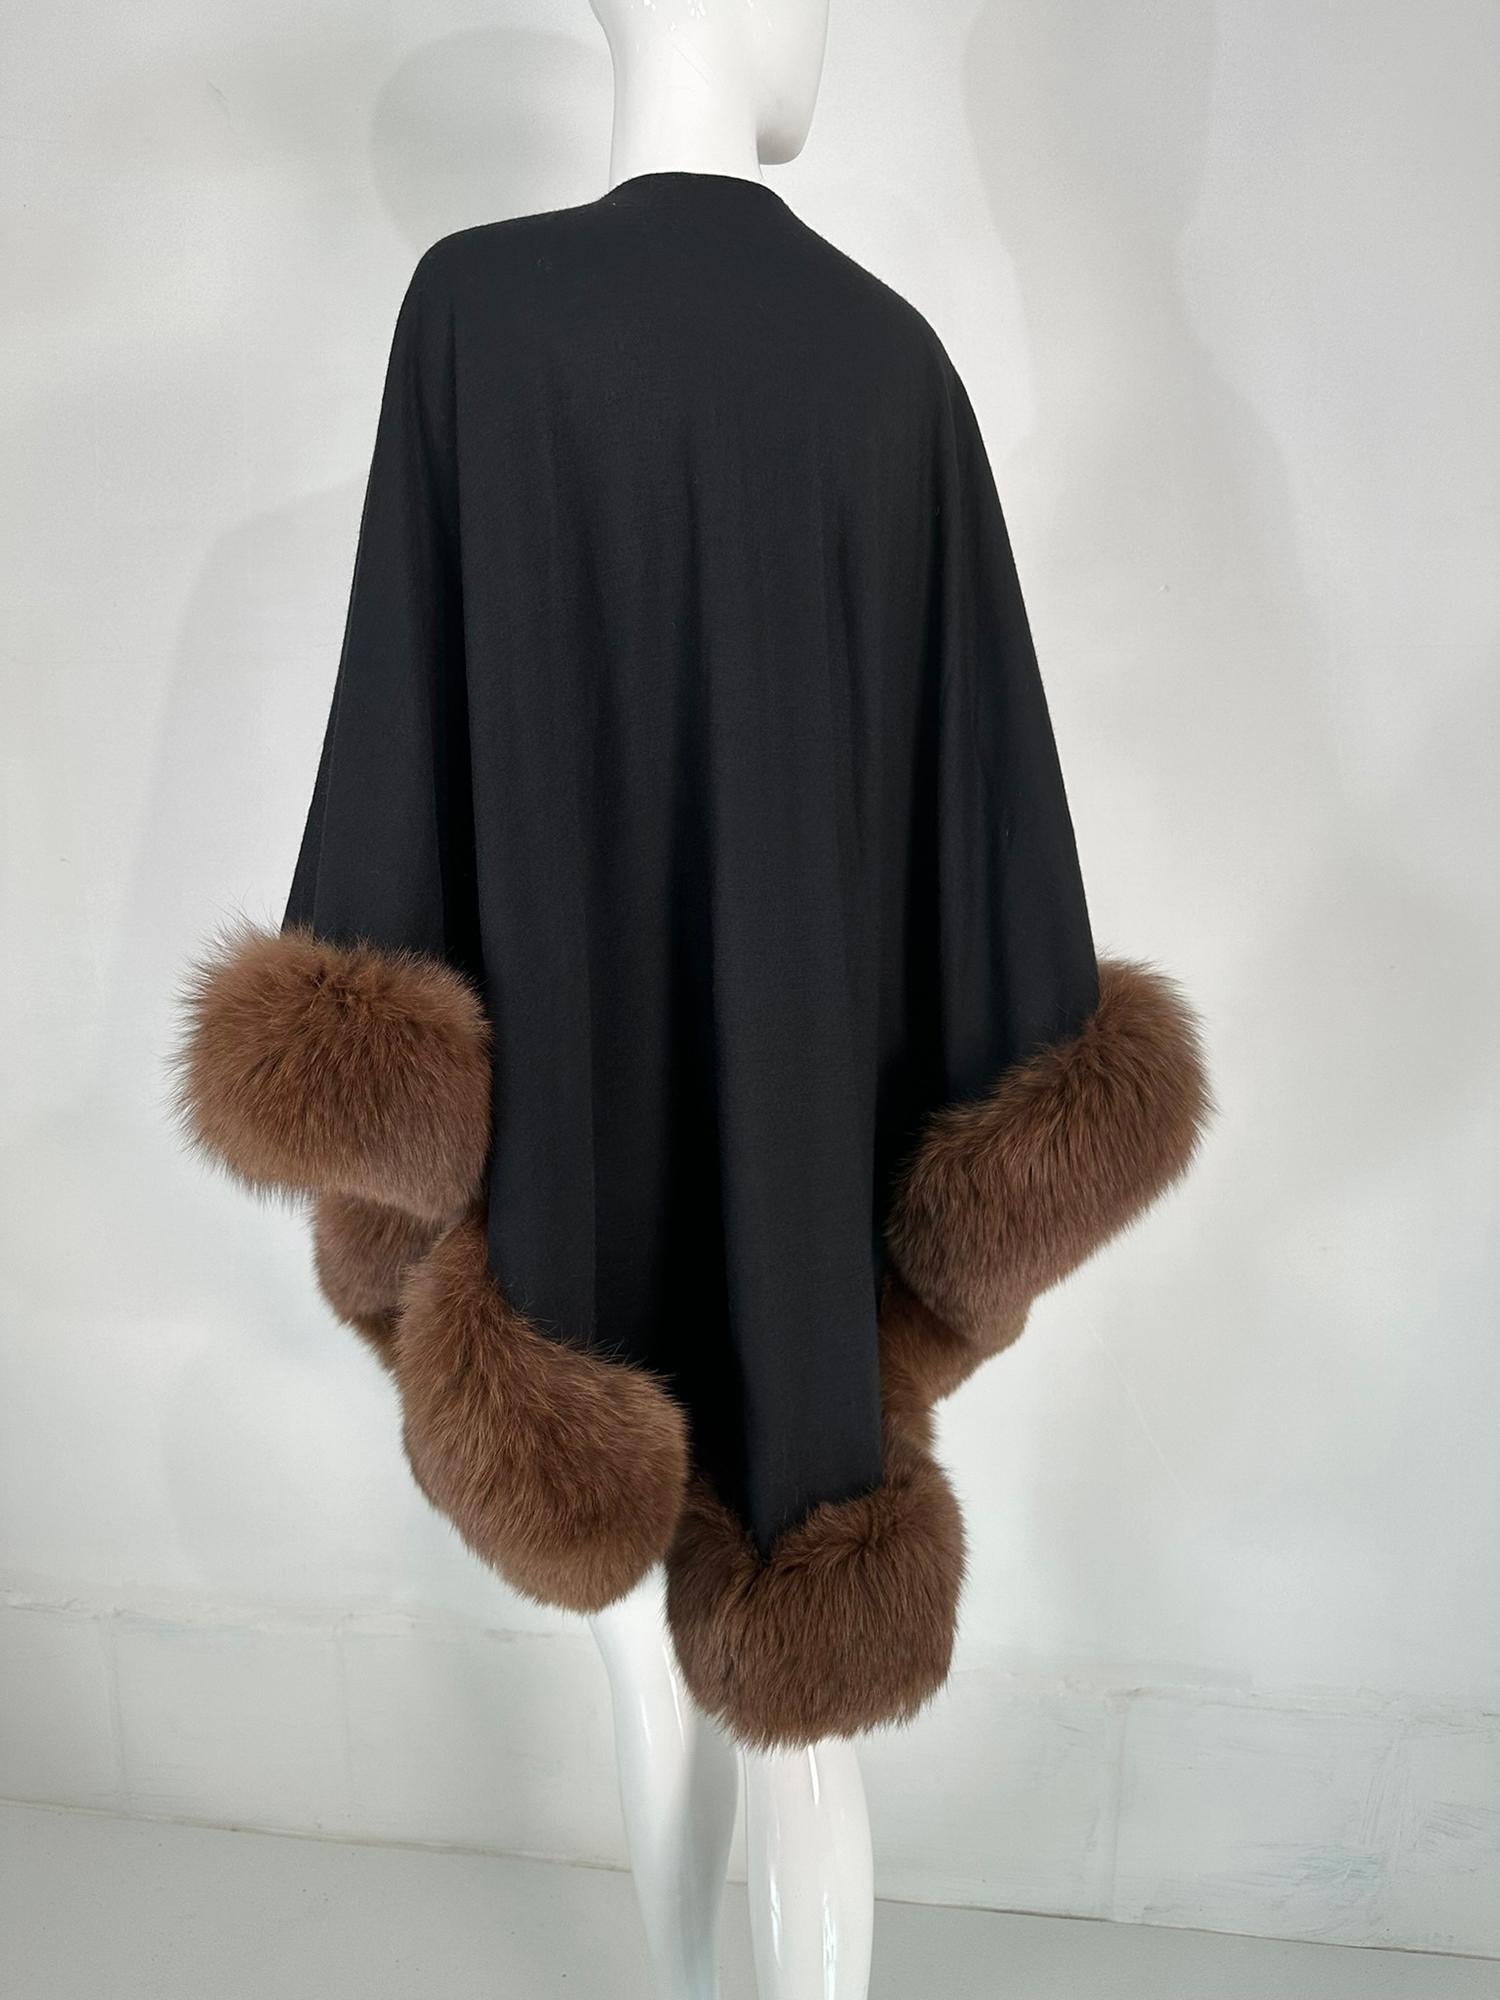 Adrienne Landau Sable Trimmed Black Wool knit Cape/Wrap From the 1990s For Sale 3